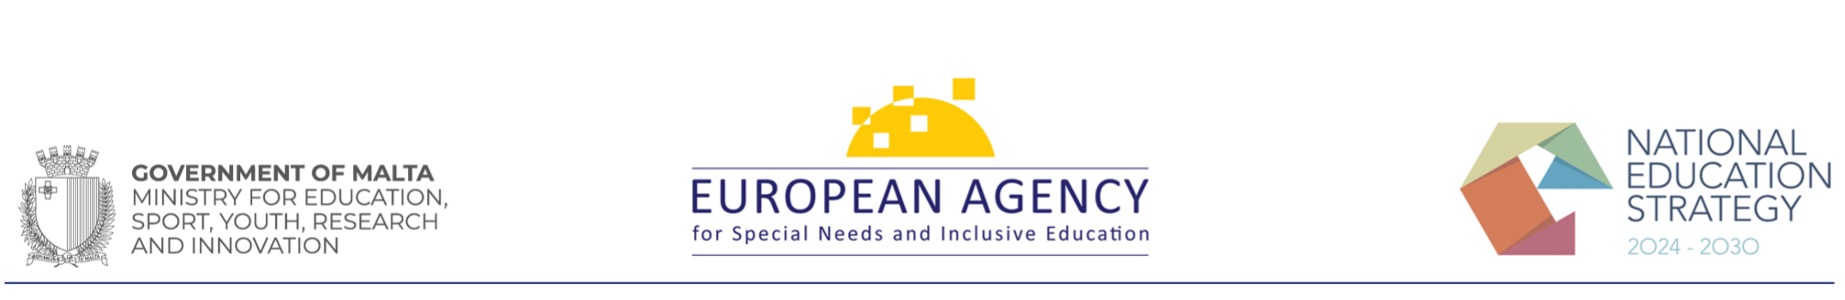 Logos: Malta Ministry for Education, Sport, Youth, Research and Innovation; European Agency for Special Needs and Inclusive Education; National Education Strategy 2024-2030